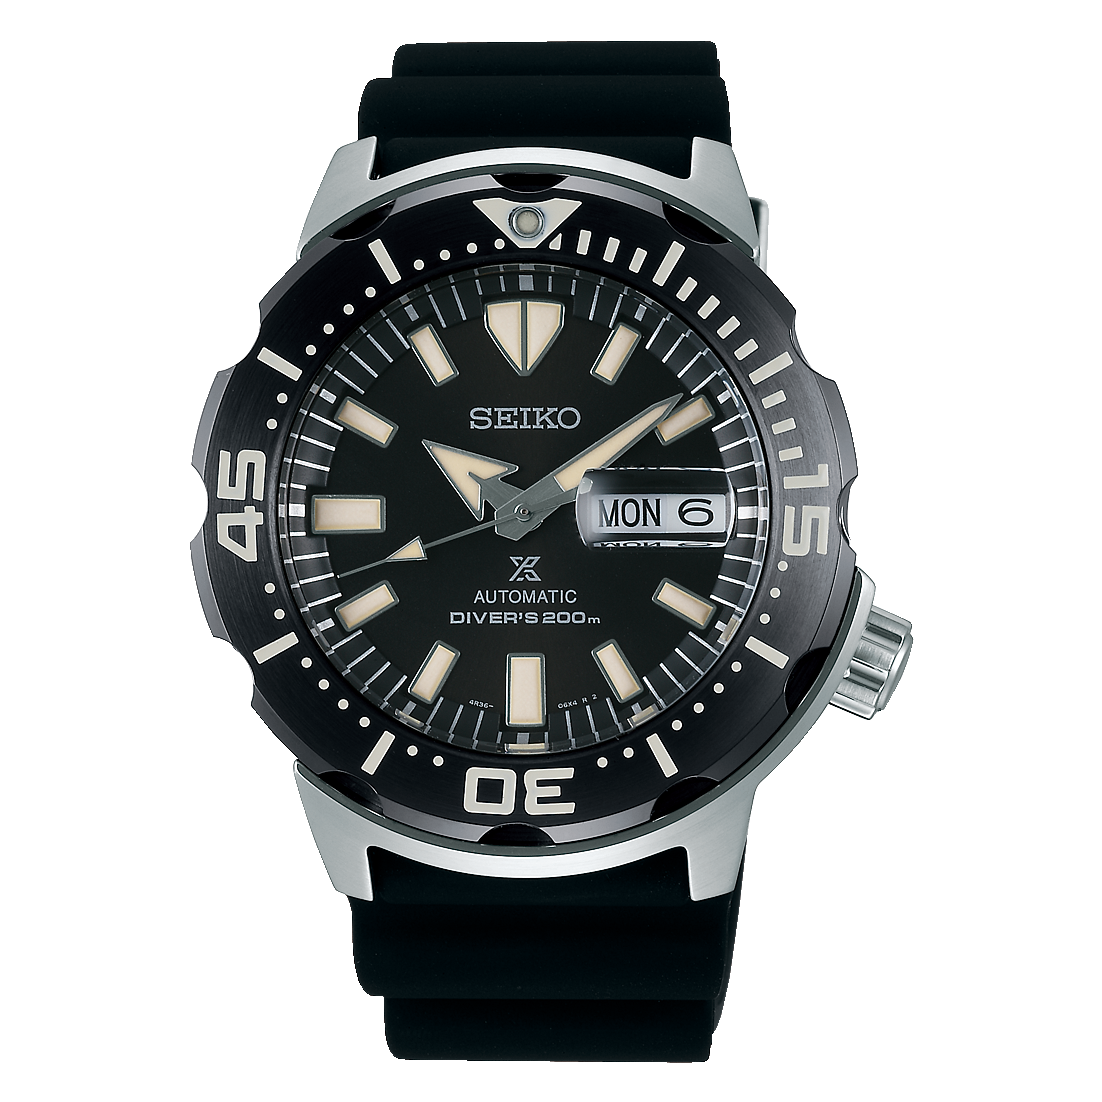 Buy Seiko Dress Watches Online In Singapore | City Chain SG – Page 15 –  City Chain Singapore